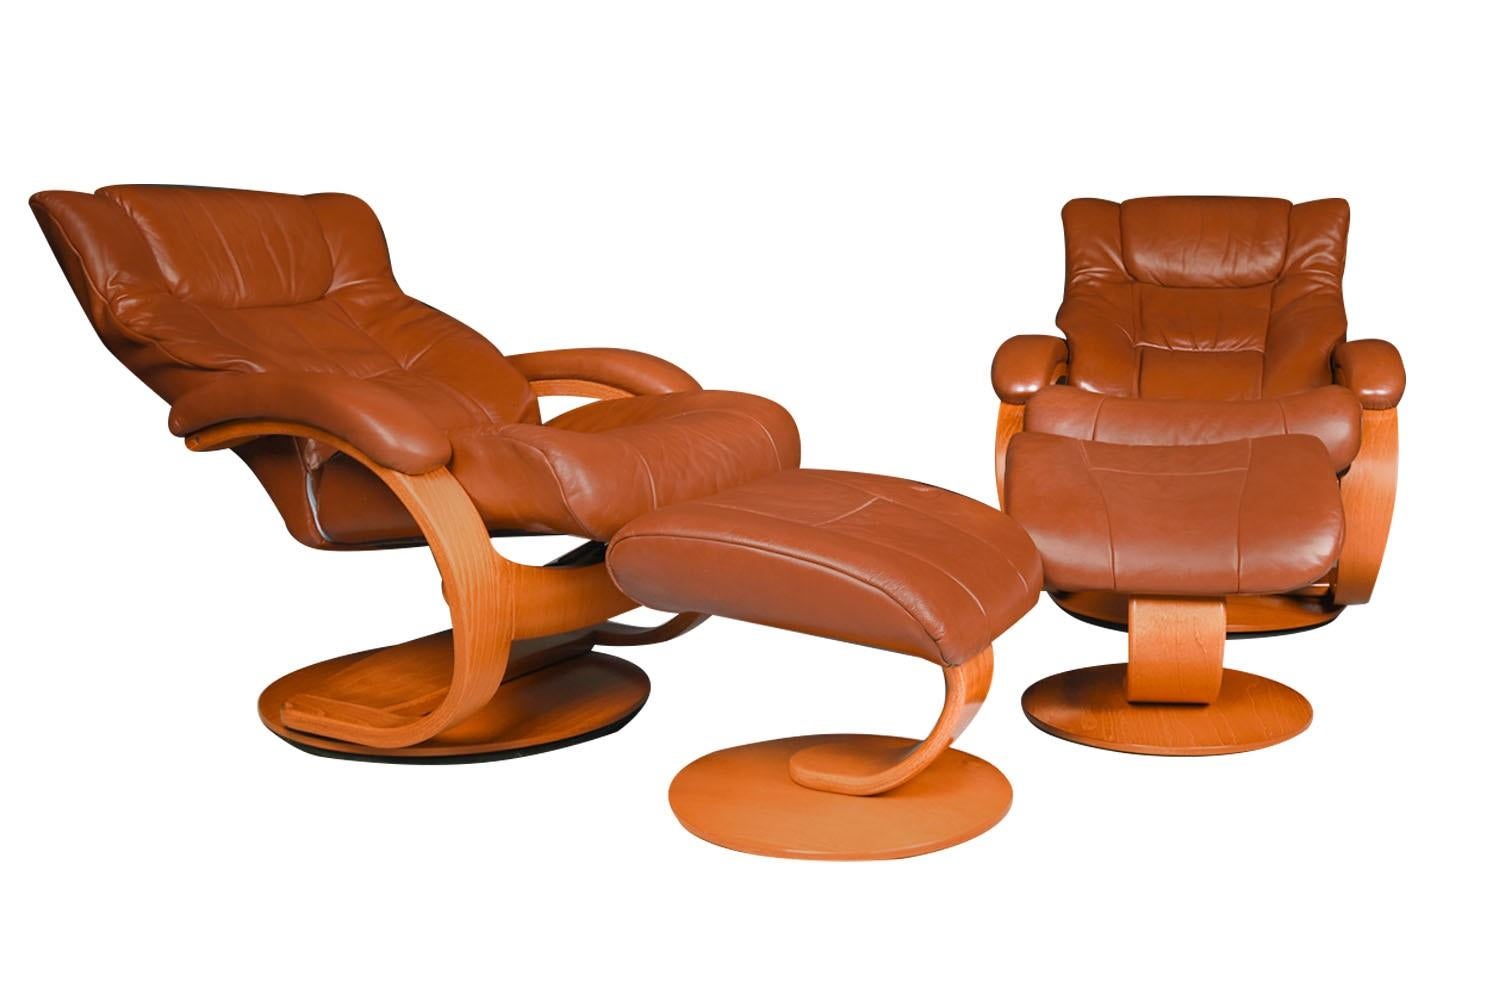 Late 20th Century Mid-Century Leather Pair Norway Lounge Chairs Ottomans Hjellegjerde Mobler 